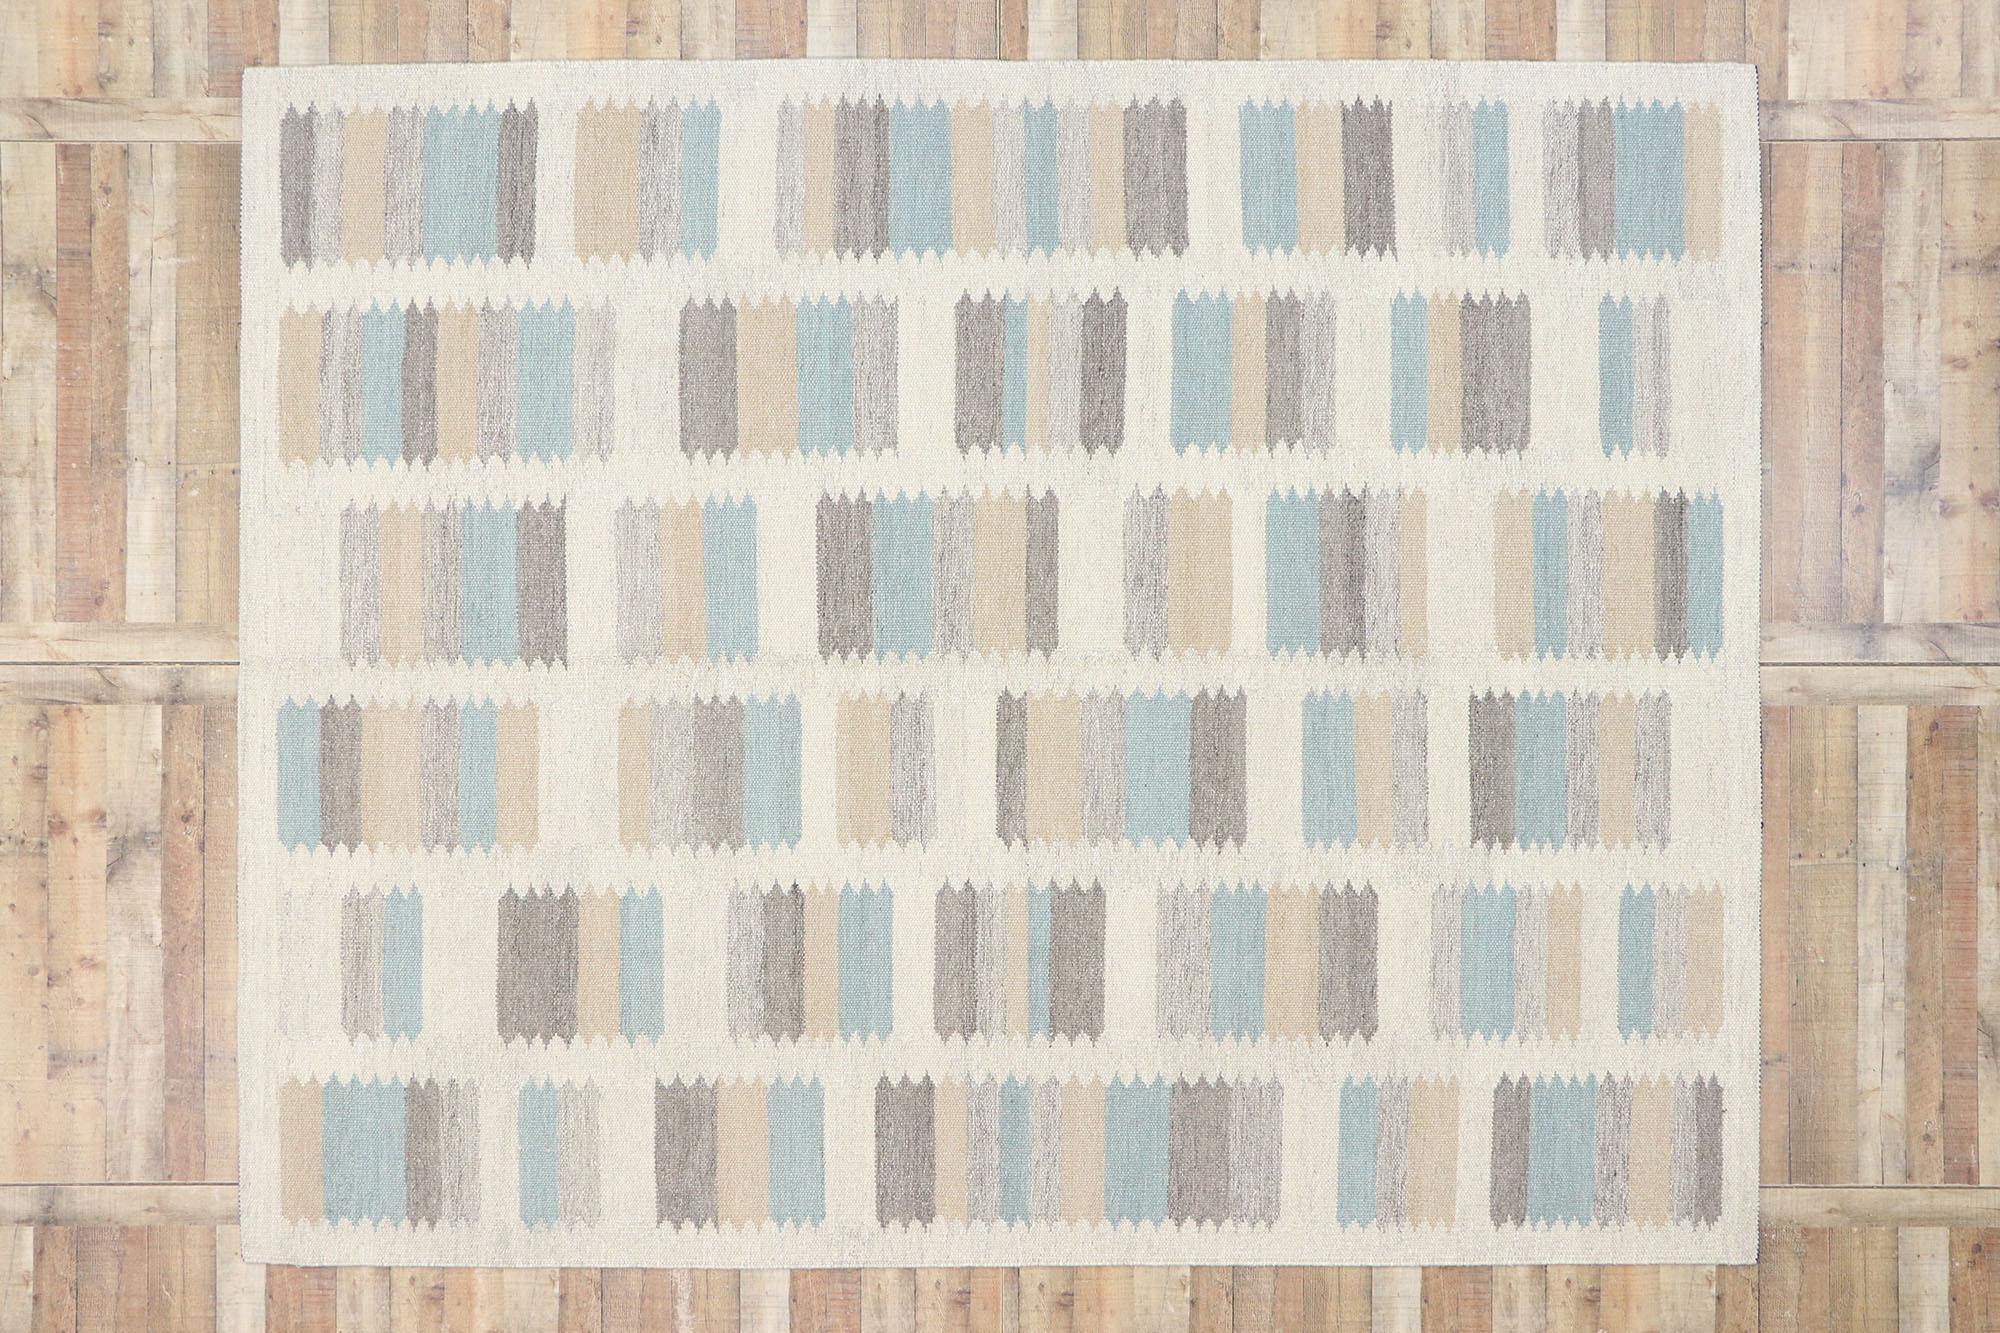 Swedish Inspired Kilim Rug, Scandinavian Modern Meets Earth-Tone Elegance In New Condition For Sale In Dallas, TX